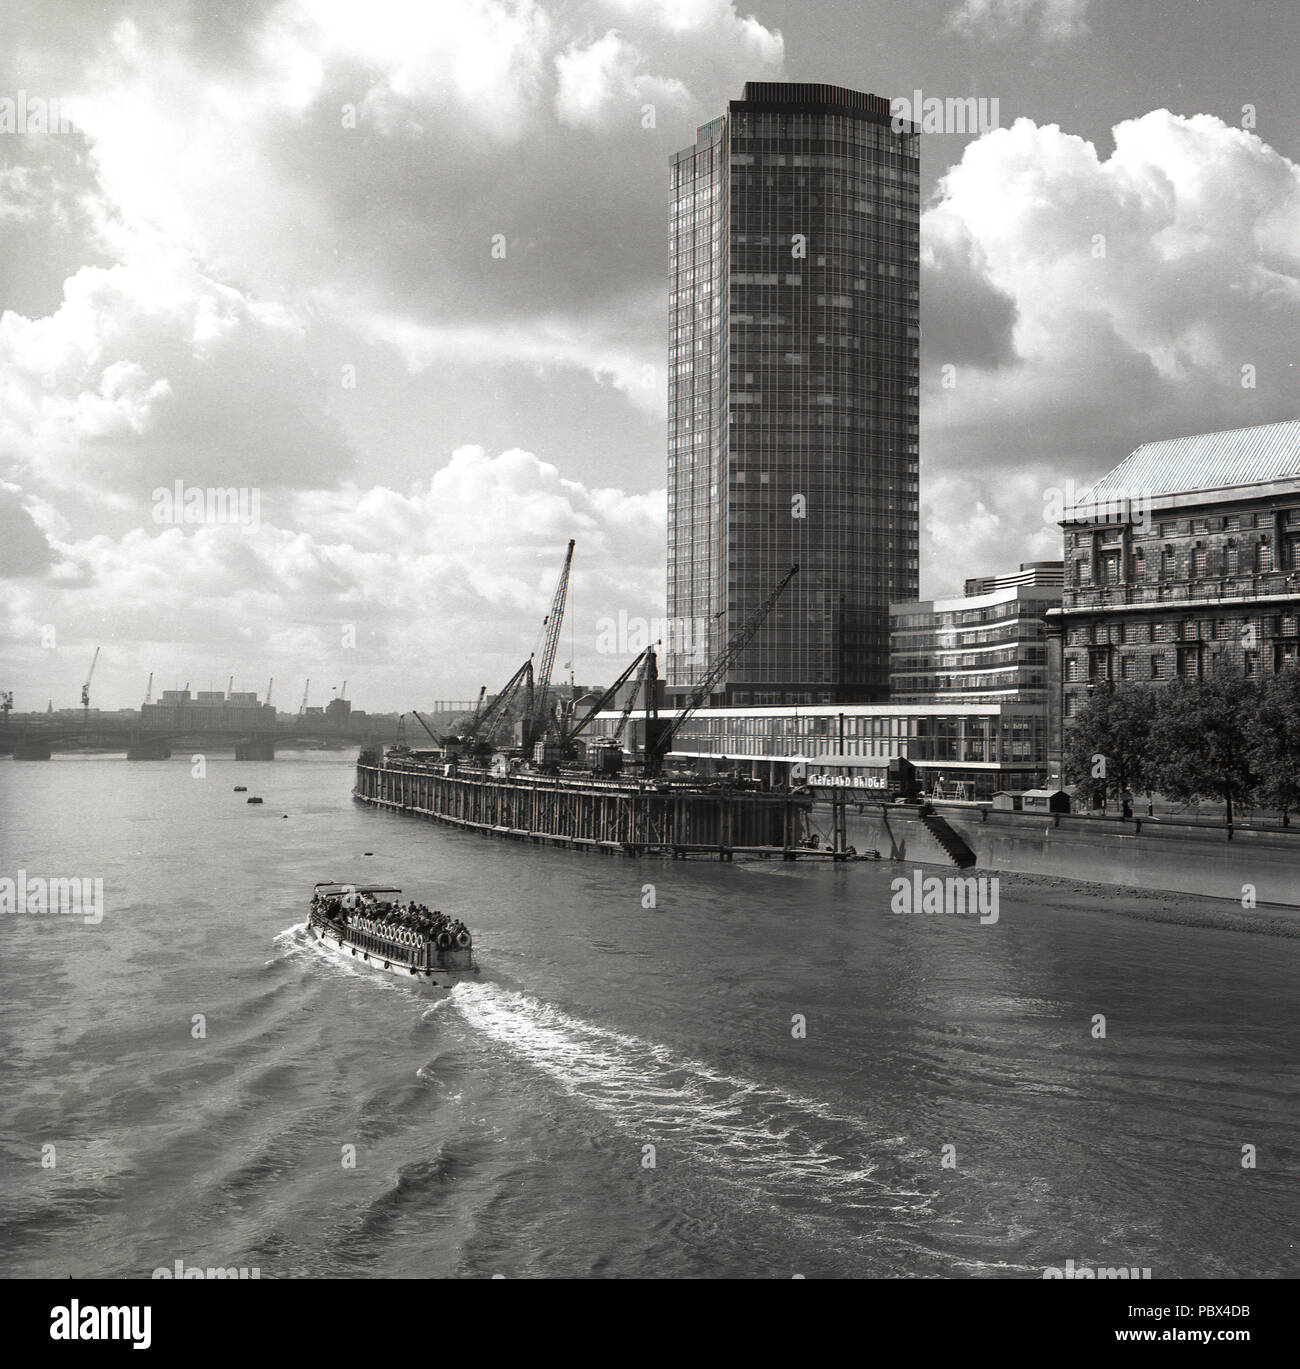 1960s, historical, a pleasure boat goes down the river Thames at the cleveland bridge landing stage or floating platform, beside a newly built modern high-rise office building  London, England, UK. The 60s saw the riverside of the Thames change for ever as wharves were developed into tower blocks and housing. Stock Photo